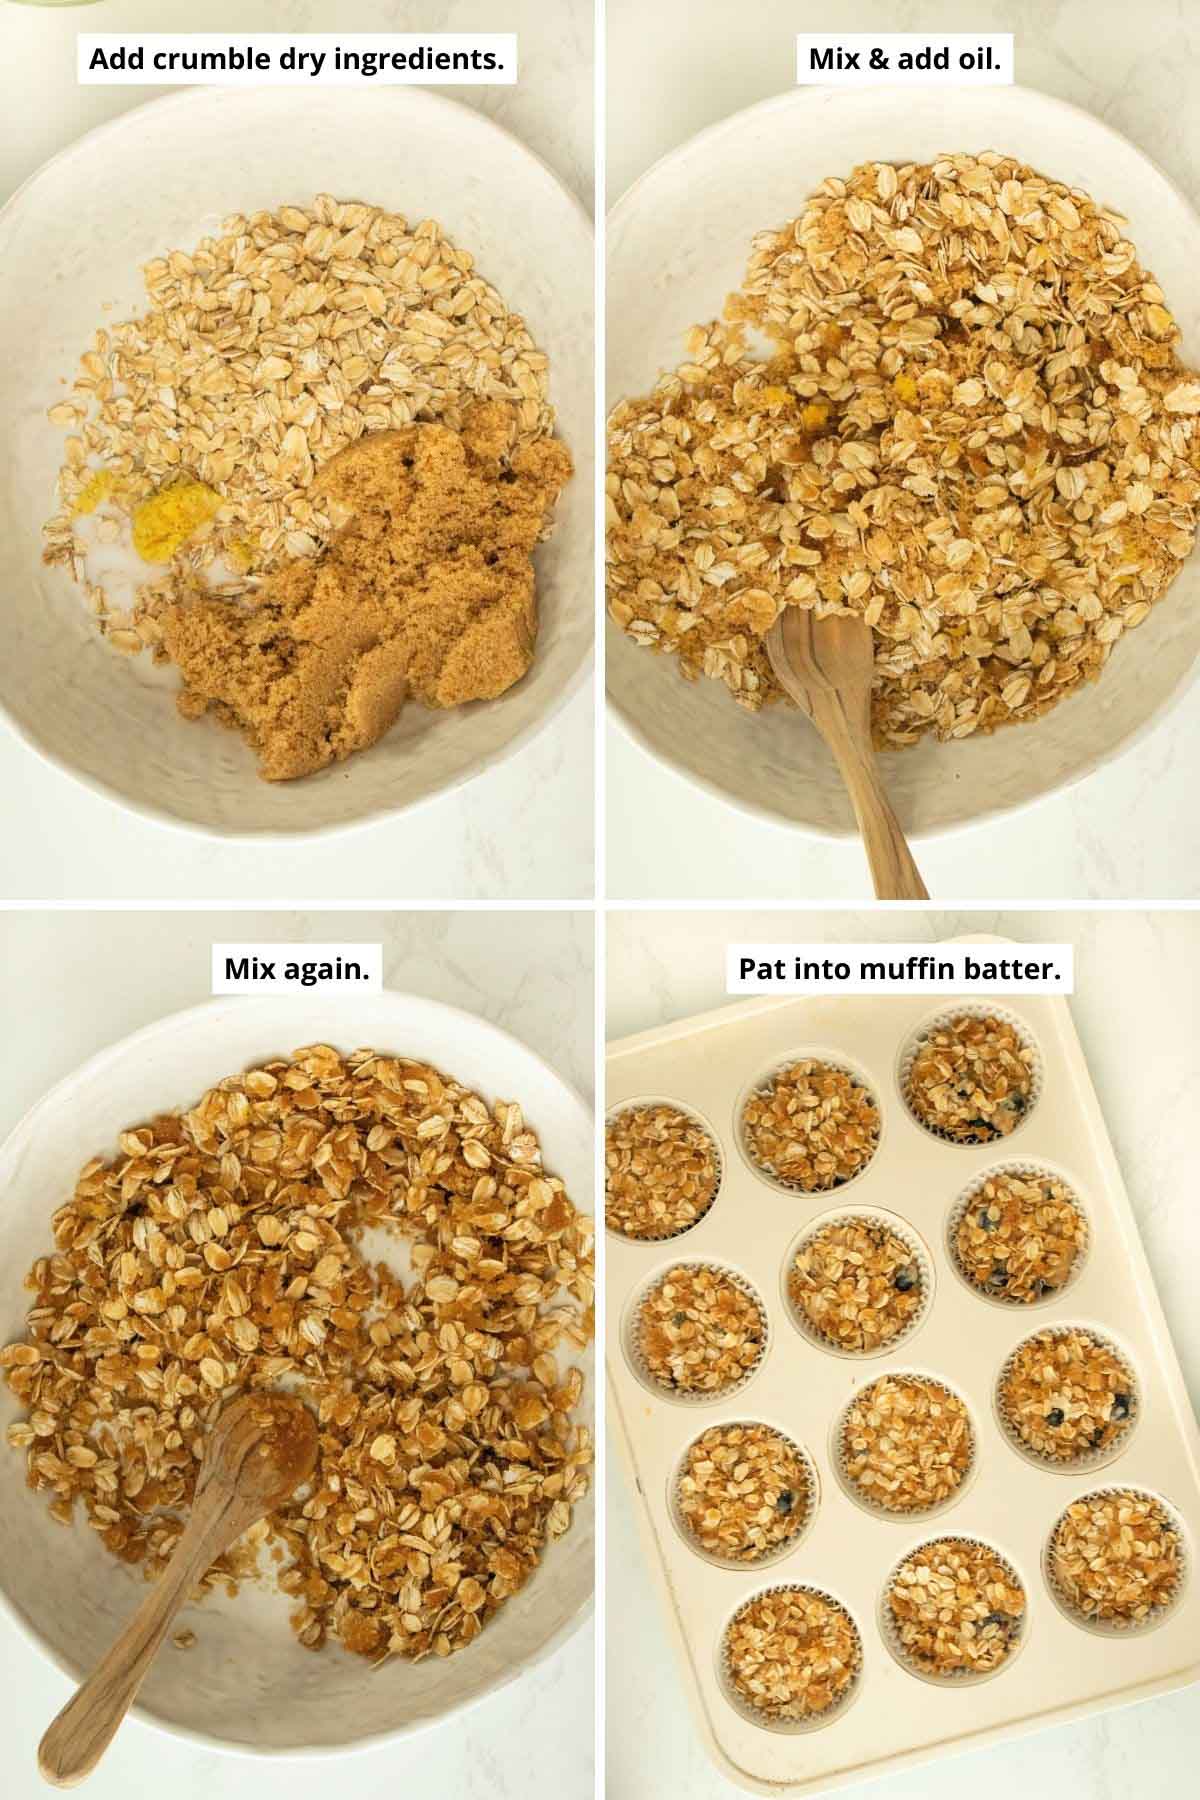 image collage showing making the oat crumble and the crumble on top of the batter in the muffin tin